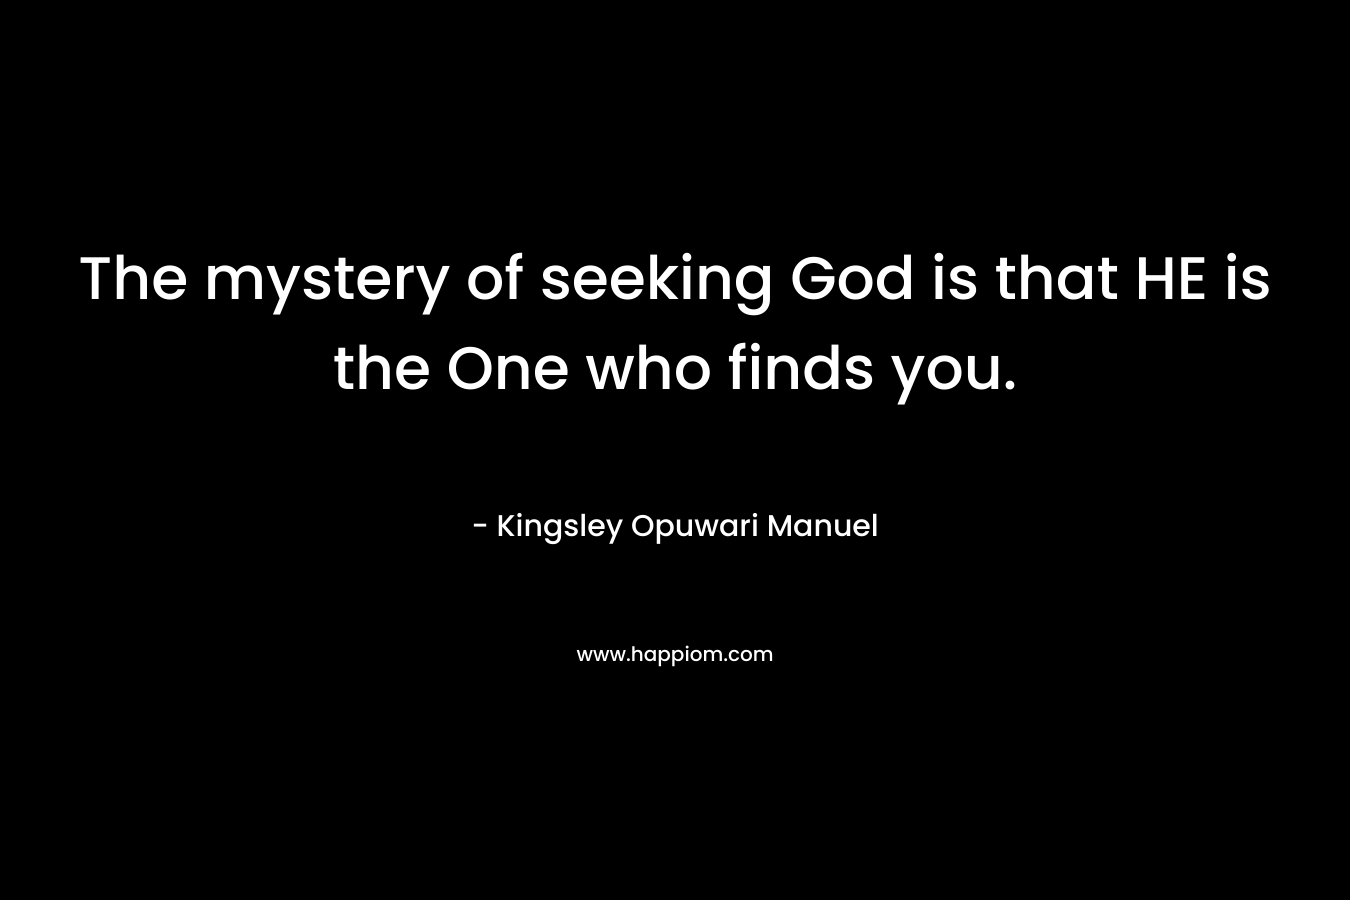 The mystery of seeking God is that HE is the One who finds you. – Kingsley Opuwari Manuel